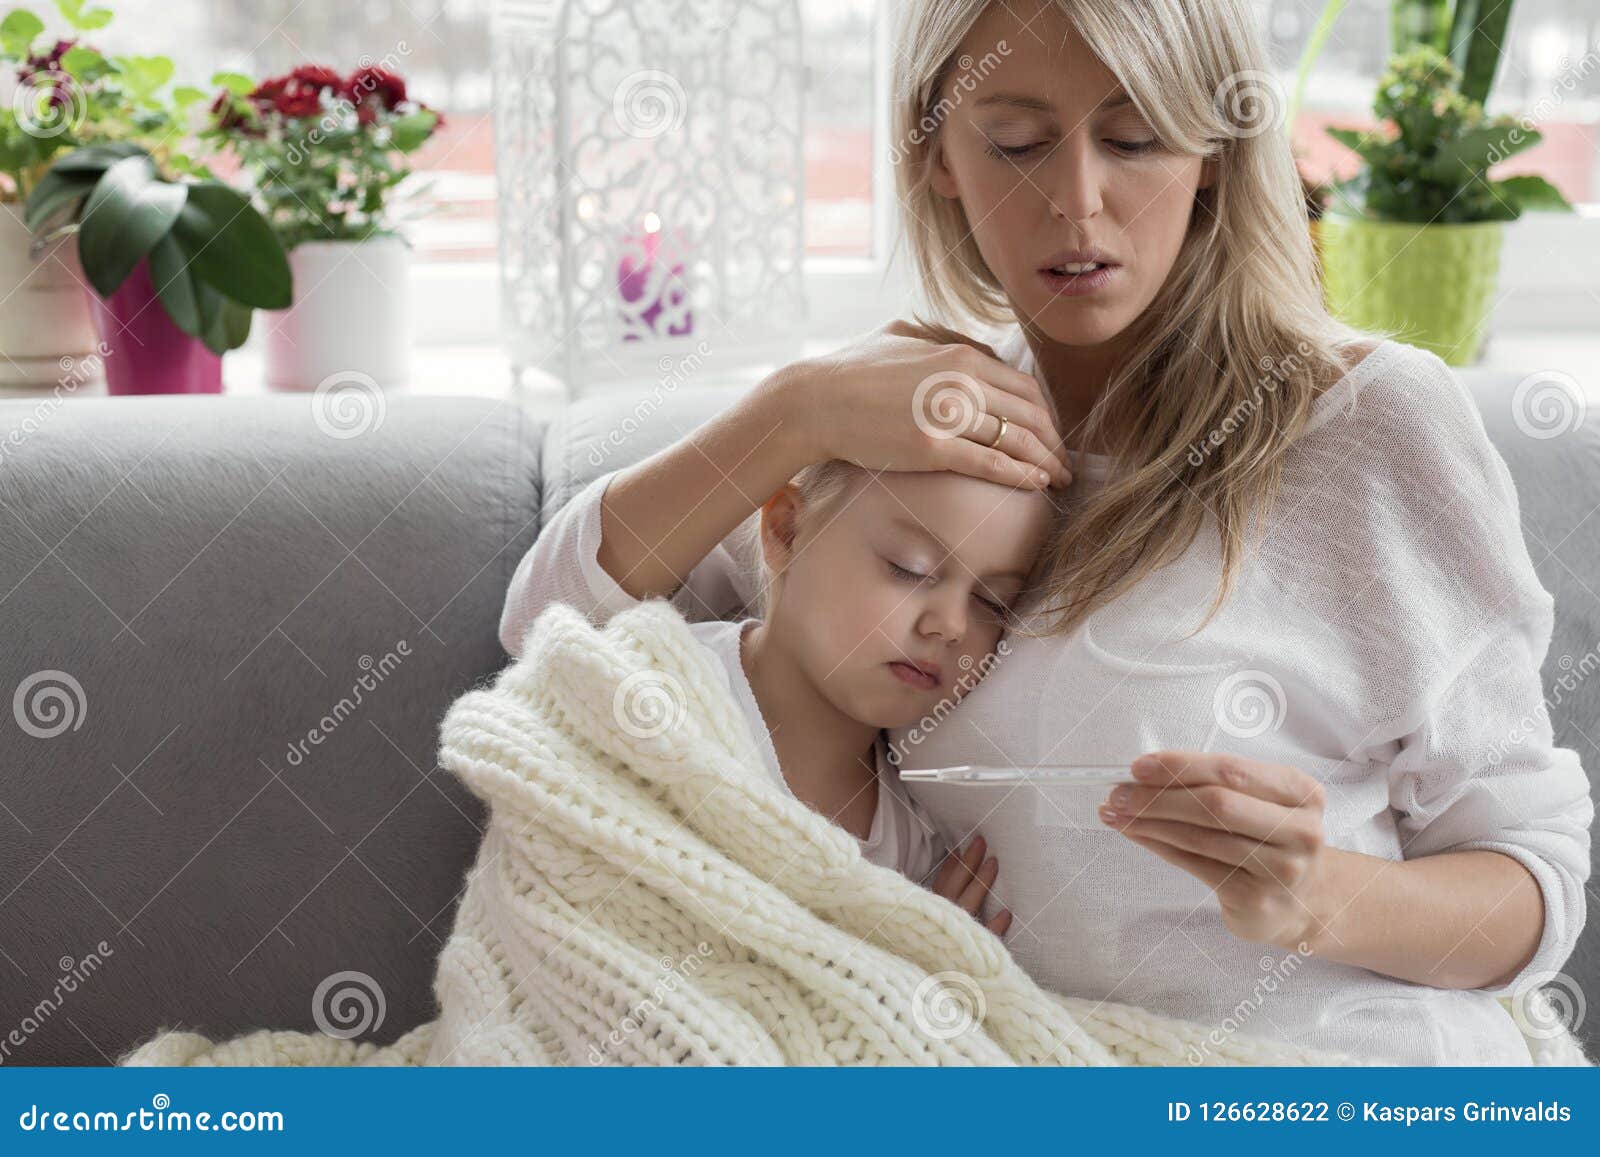 mother staying at home with her sick child